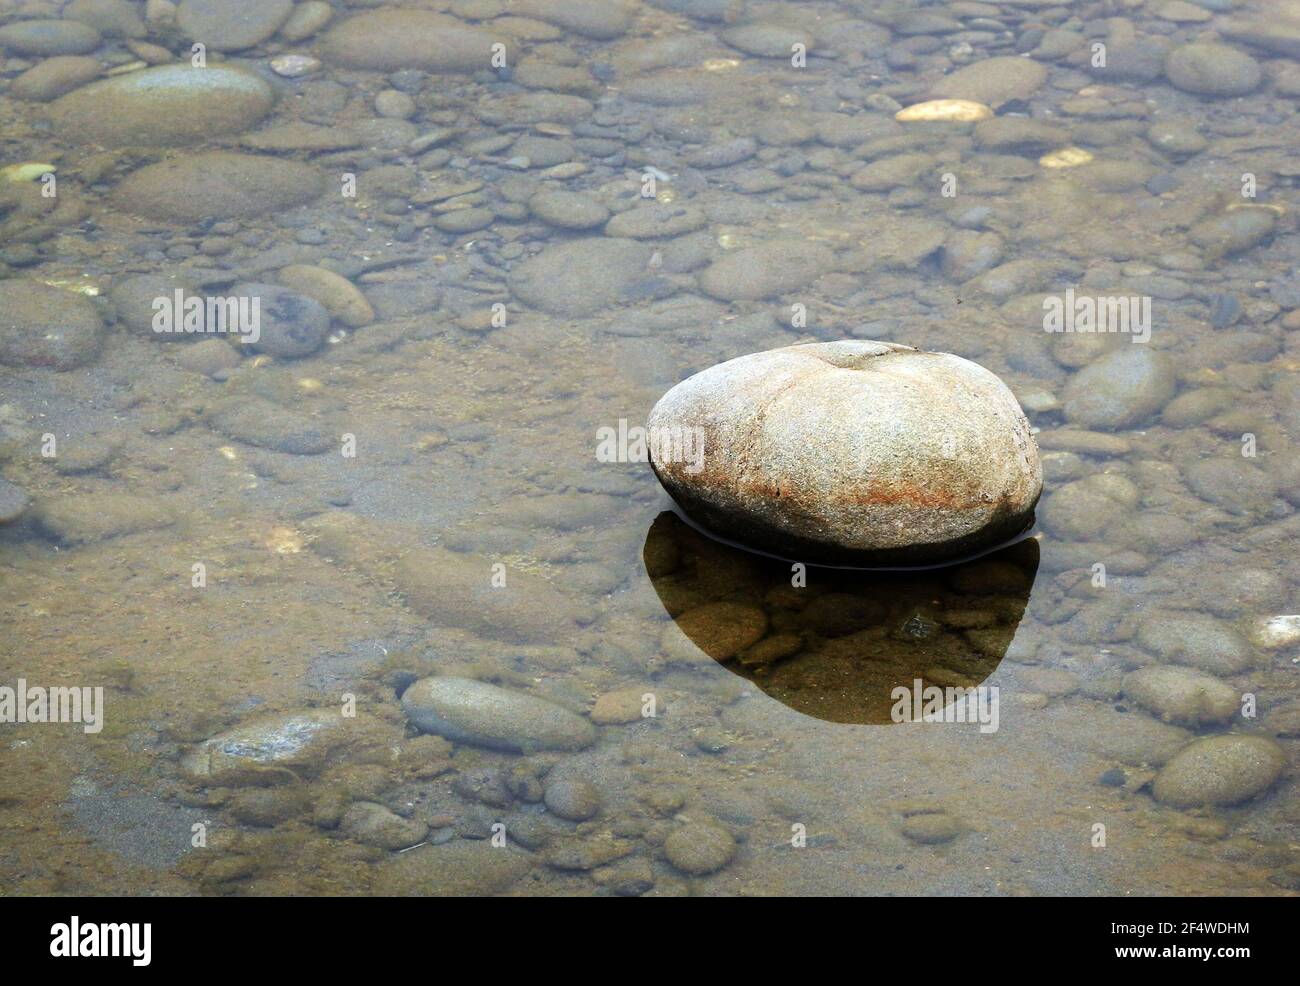 A large round stone in a shallow pond. Stock Photo